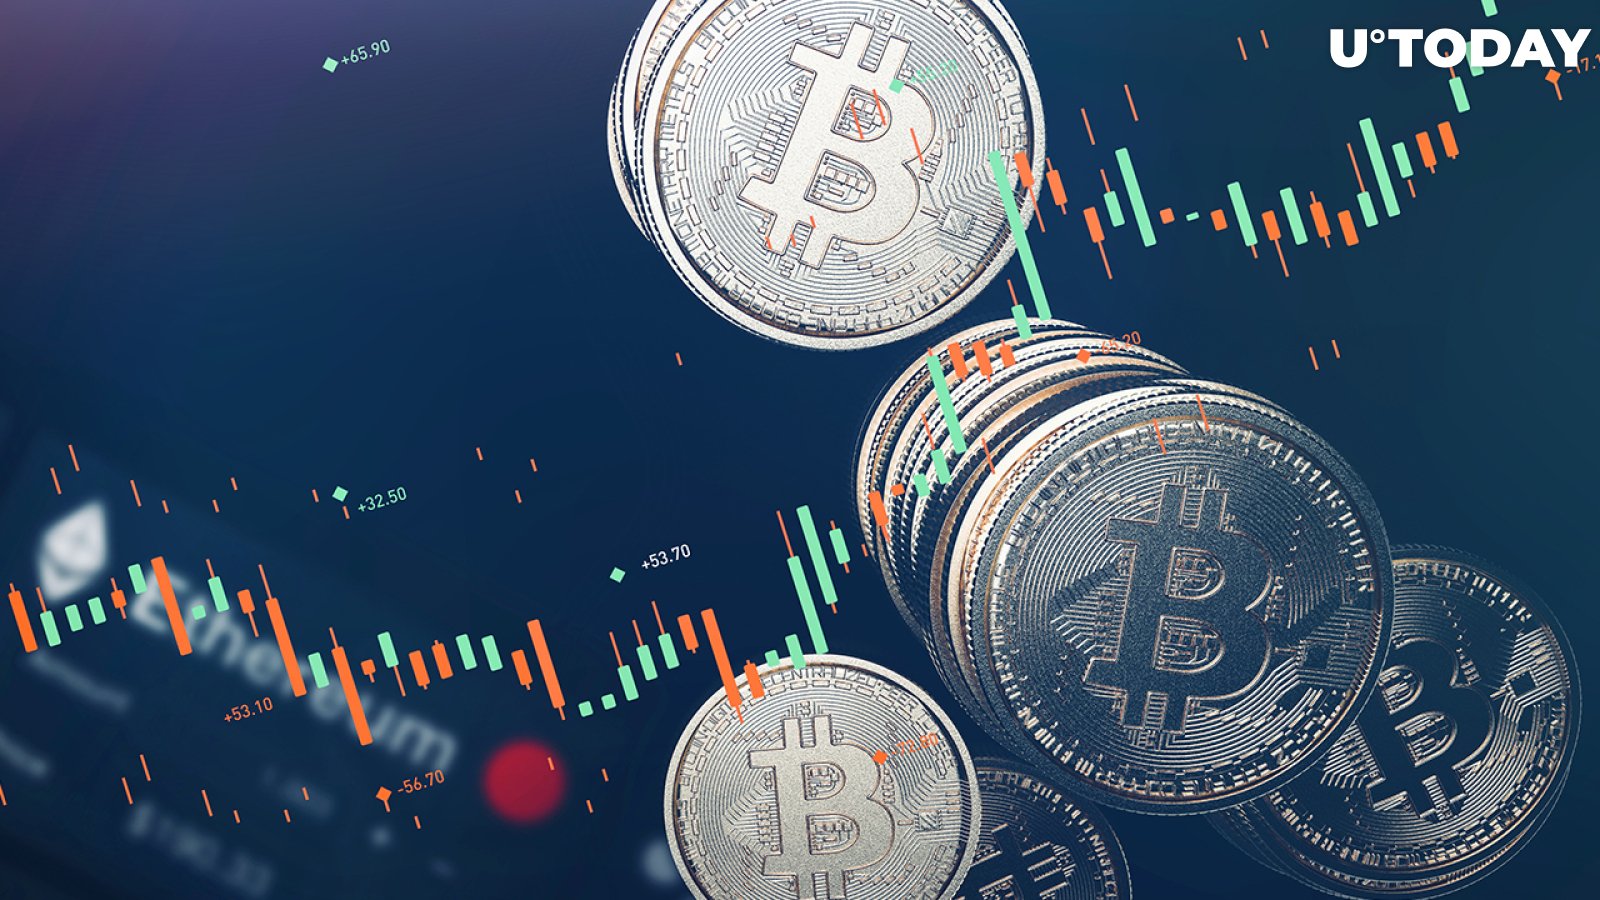 Important Technical Signal Appears on Bitcoin Daily Chart